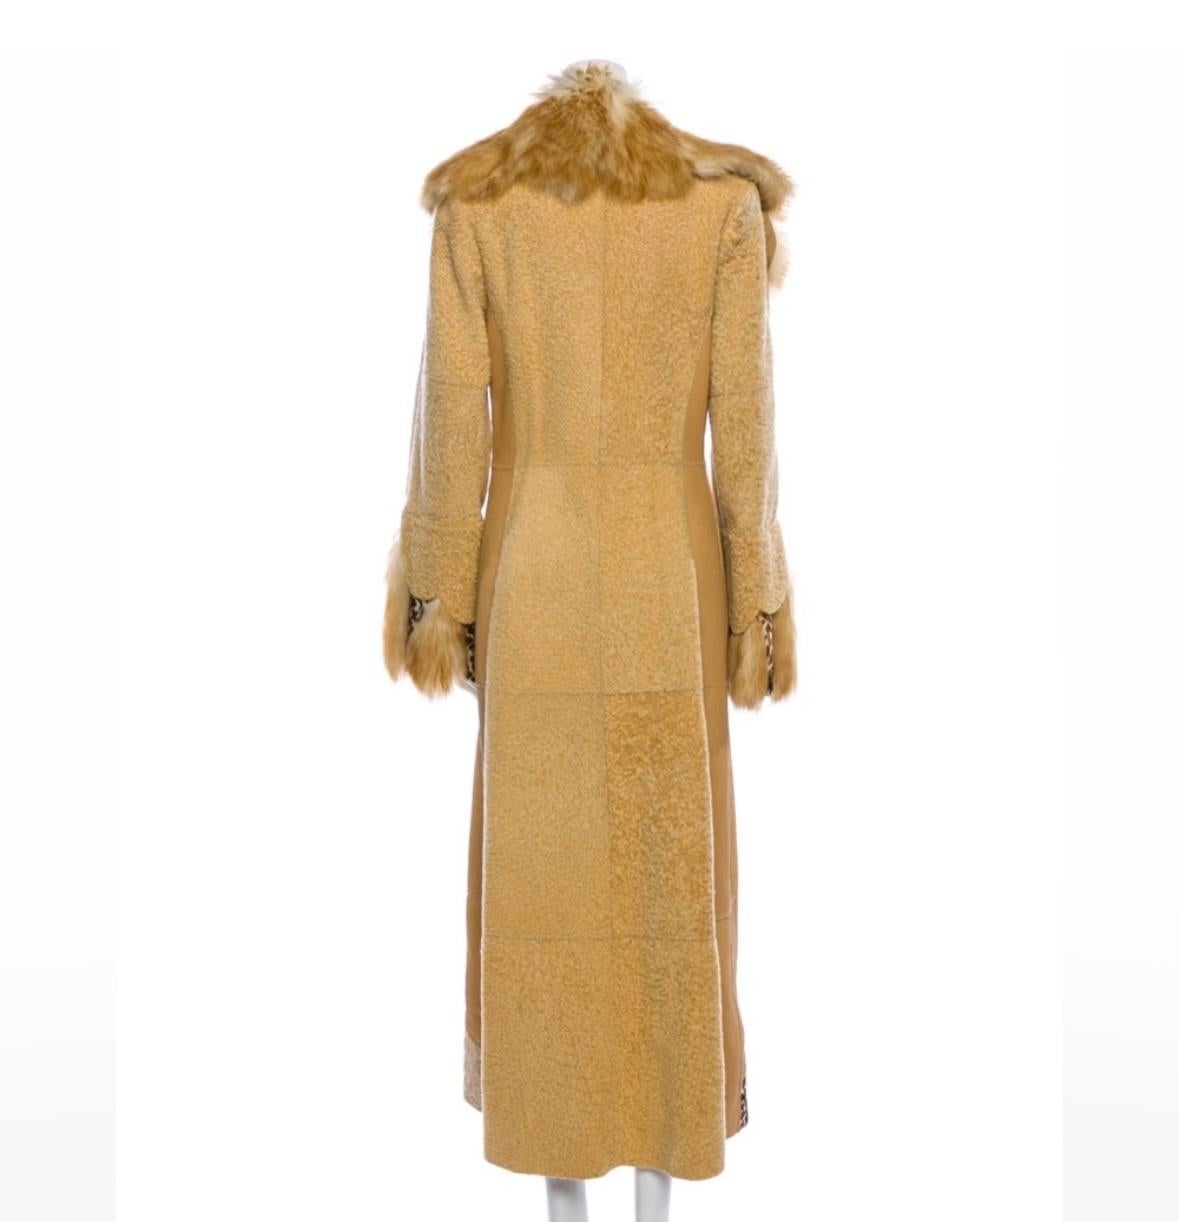 Artico shearling leather long coat In Excellent Condition For Sale In Annandale, VA